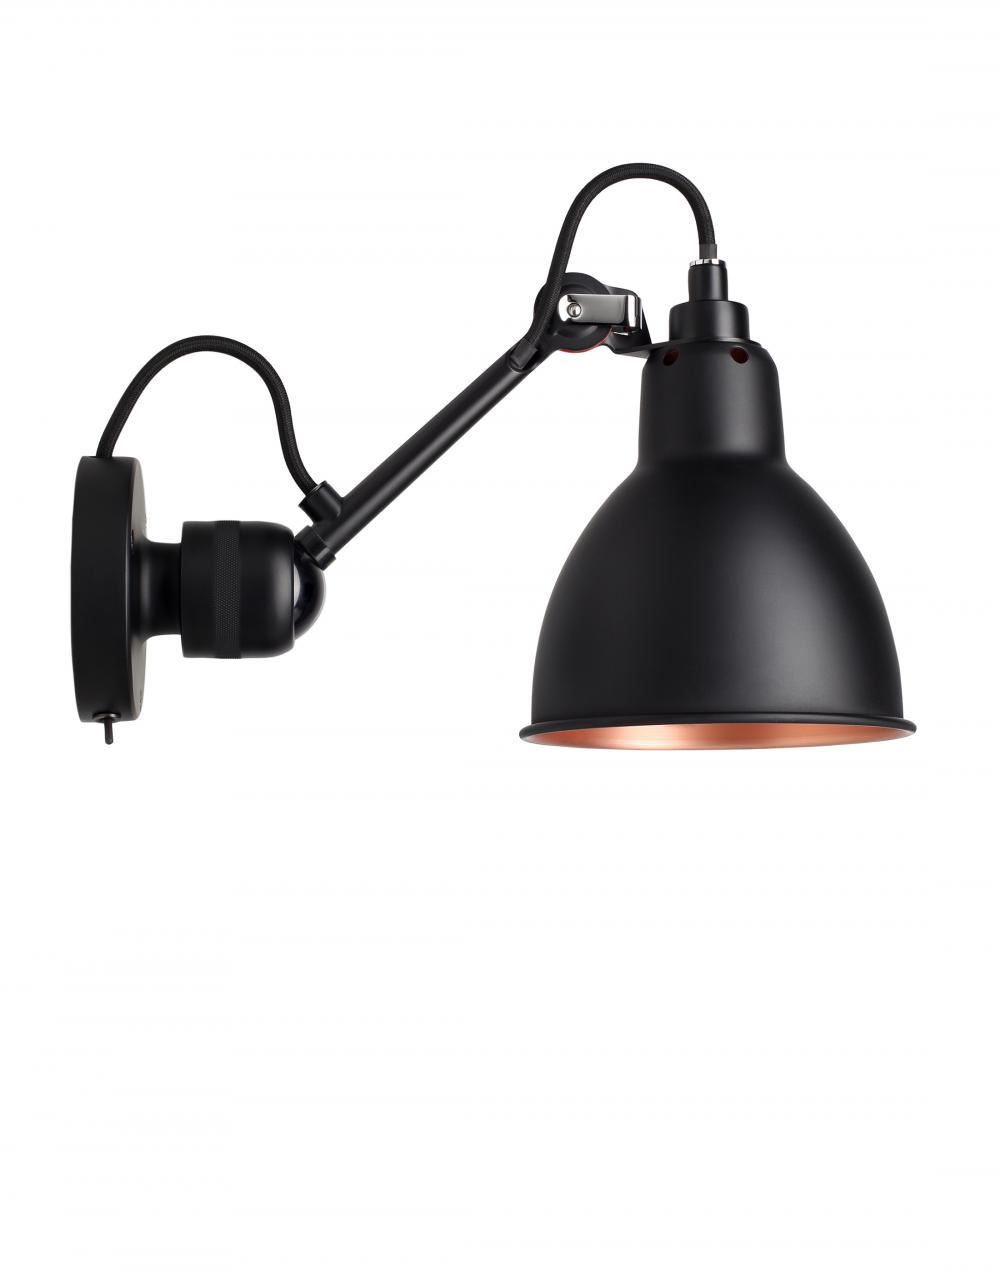 Lampe Gras 304 Small Wall Light Black Arm Black Shade With Copper Interior Round Integral Switch